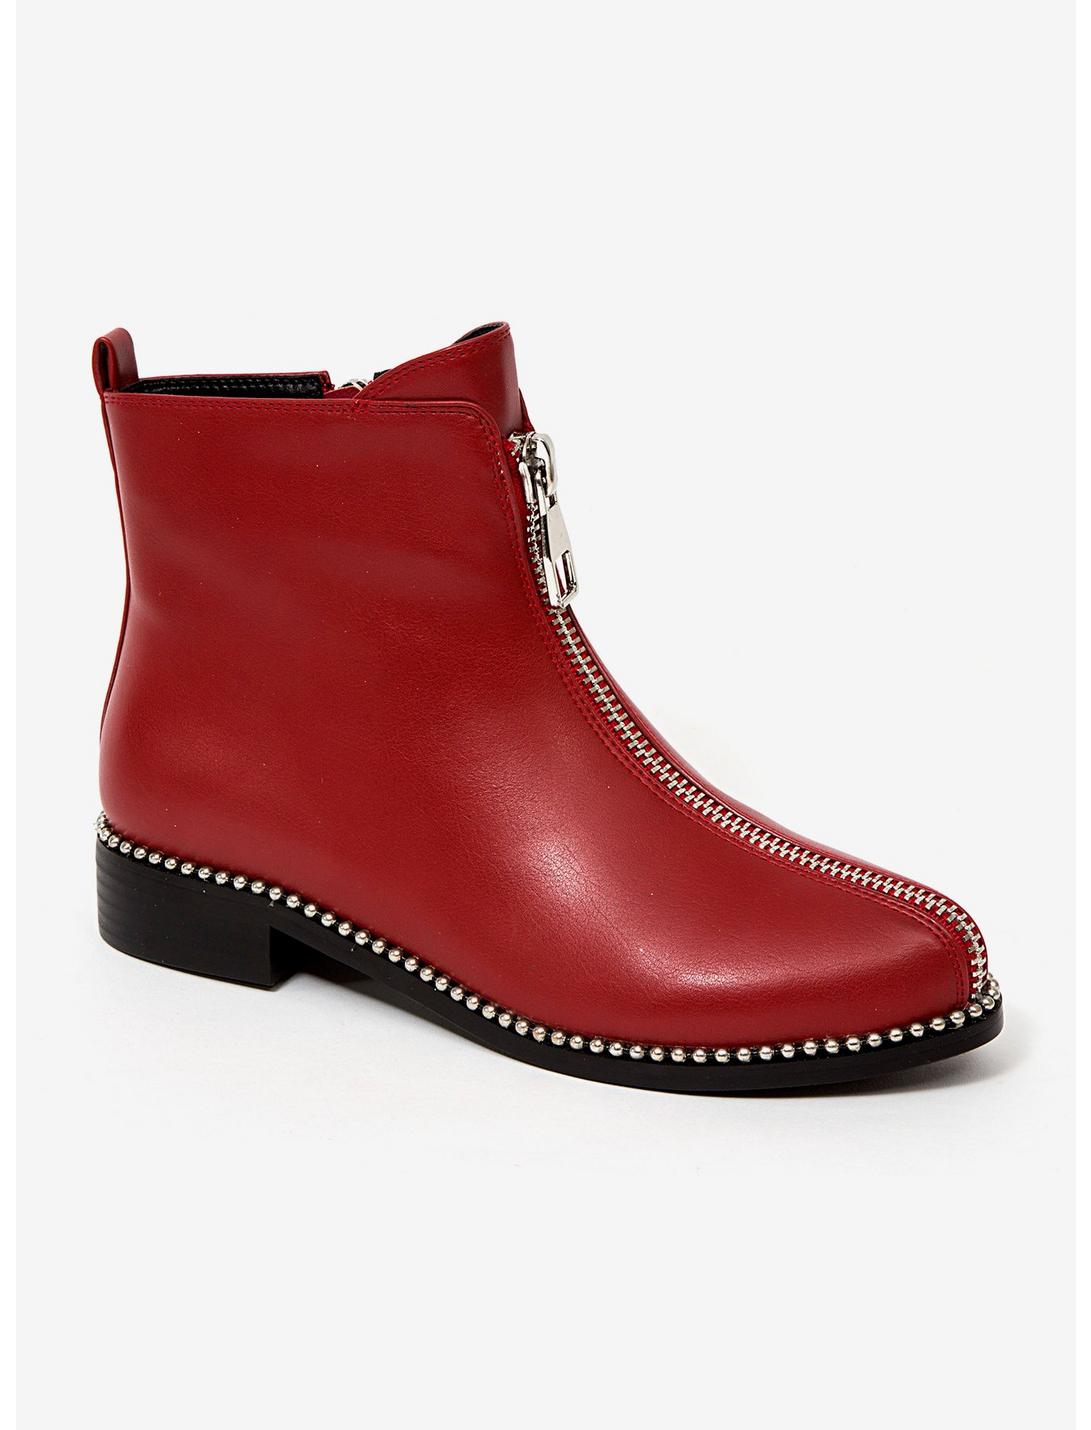 Short Booties With Front Zipper And Studs, RED, hi-res